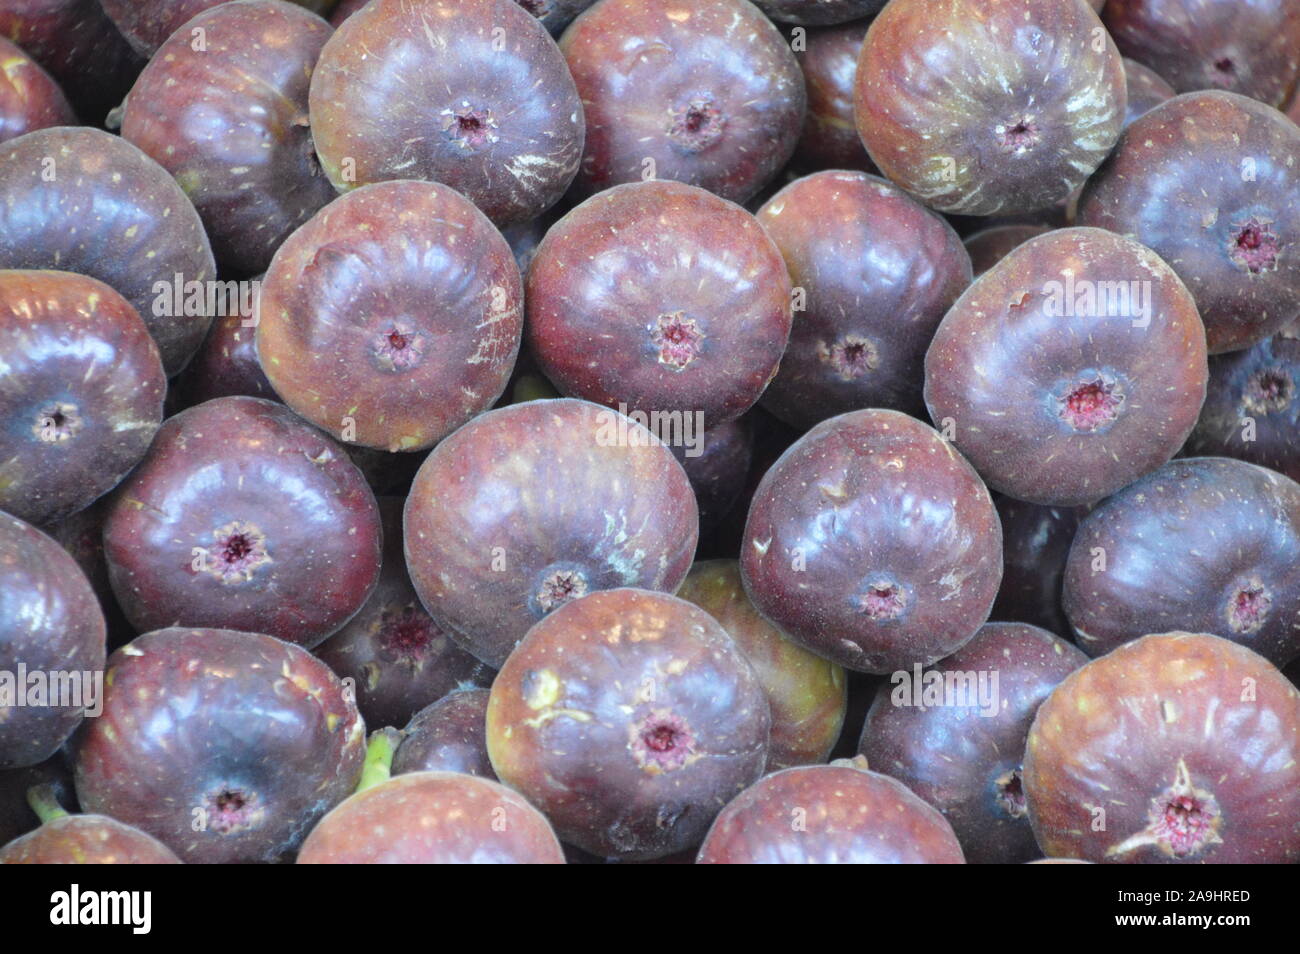 beautiful fresh and tasty fruits of ficus carica Stock Photo